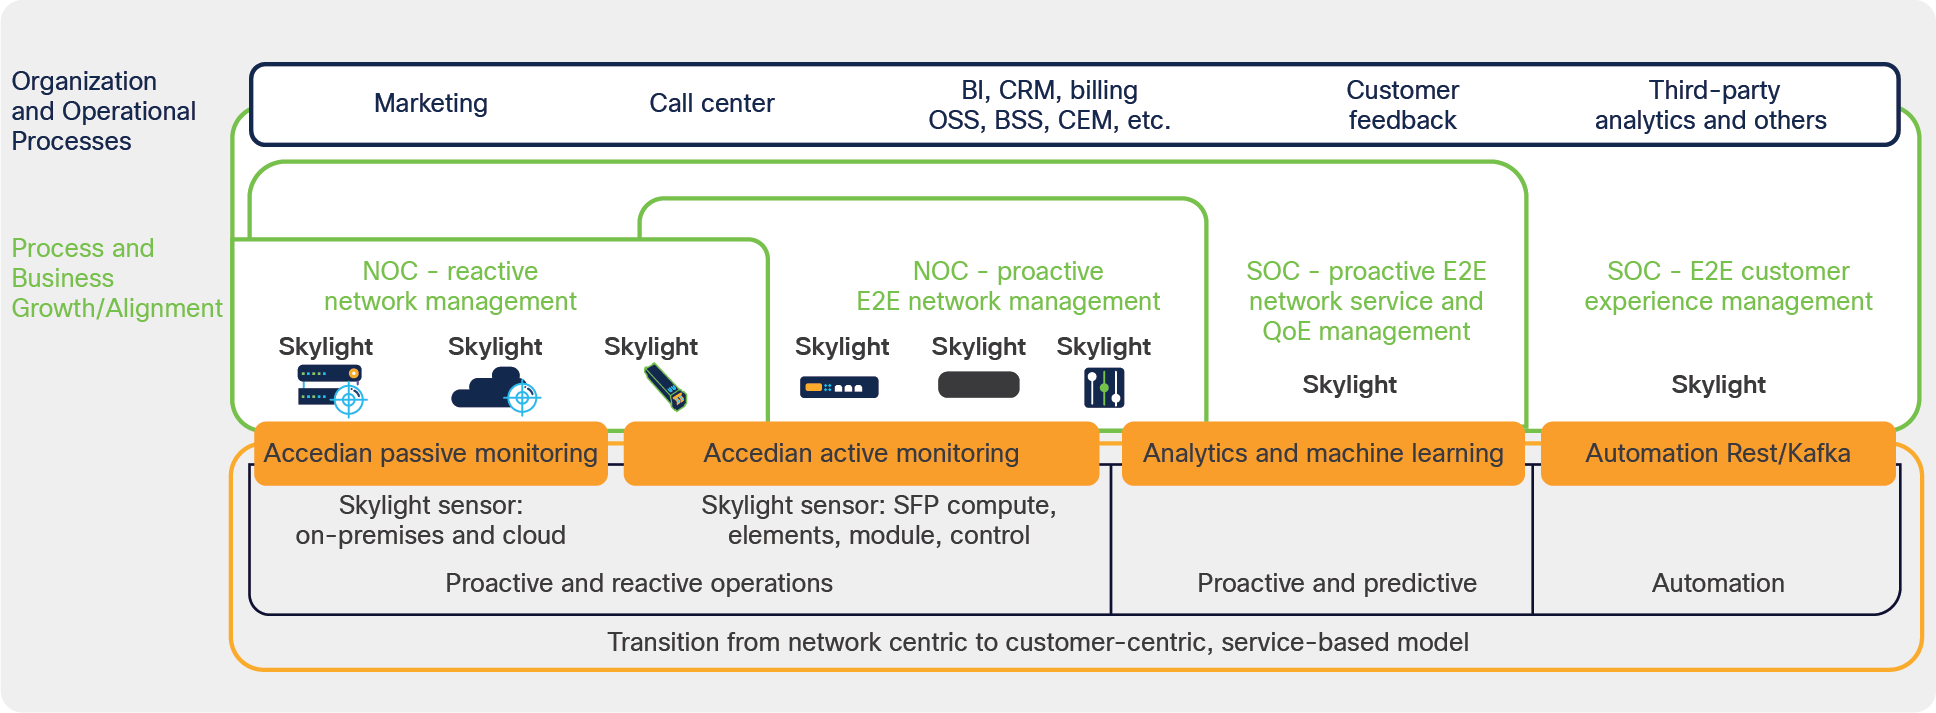 Operational & planning lifecycle operations migrate towards service-based model